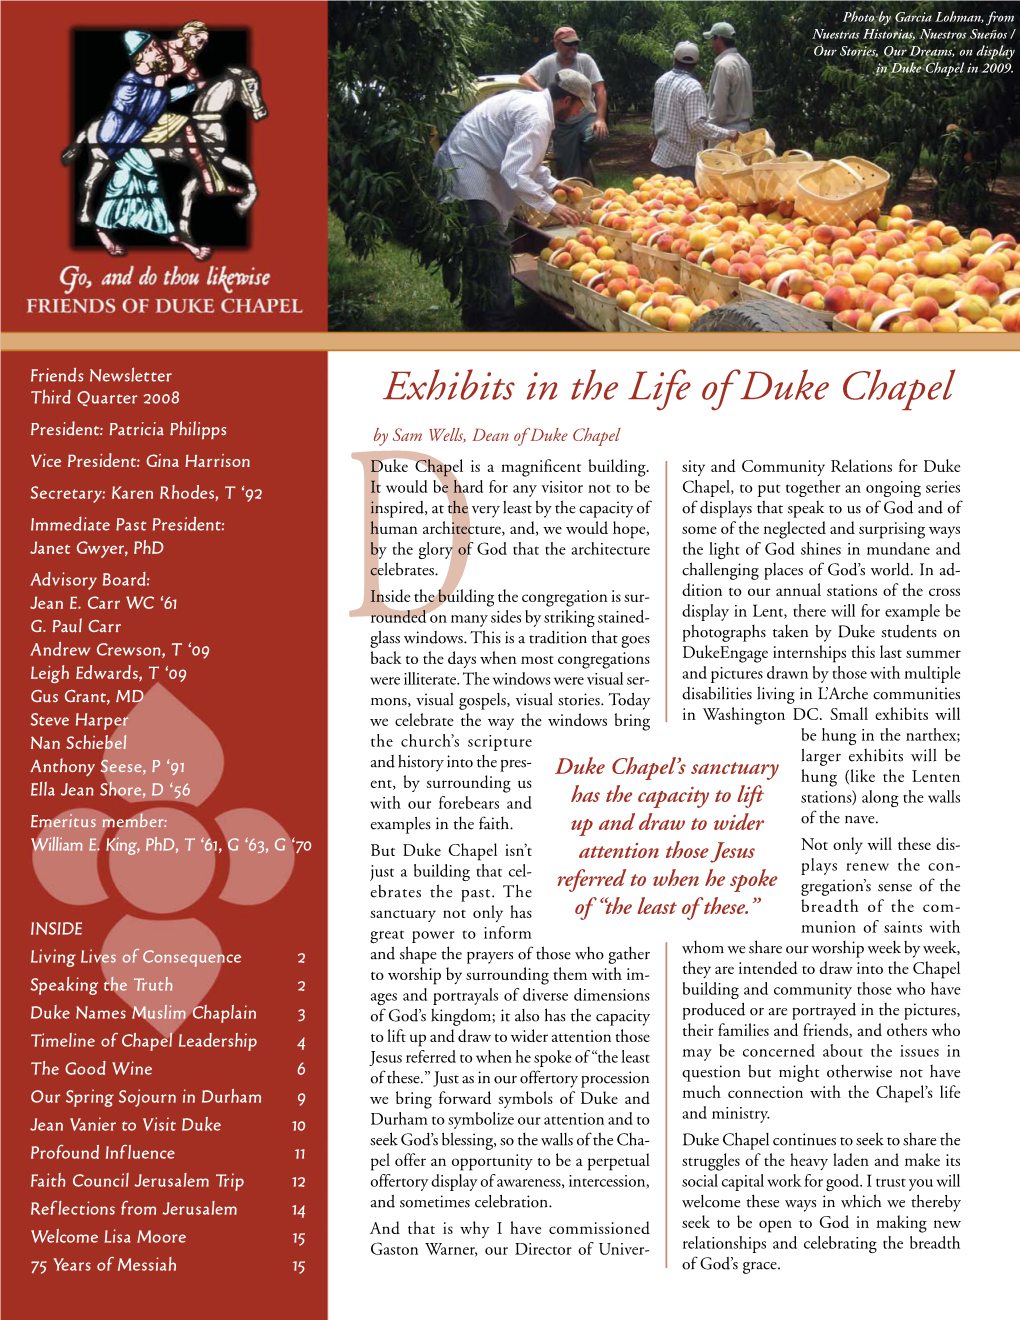 Friends of the Chapel Newsletter 3Rd 08.Indd